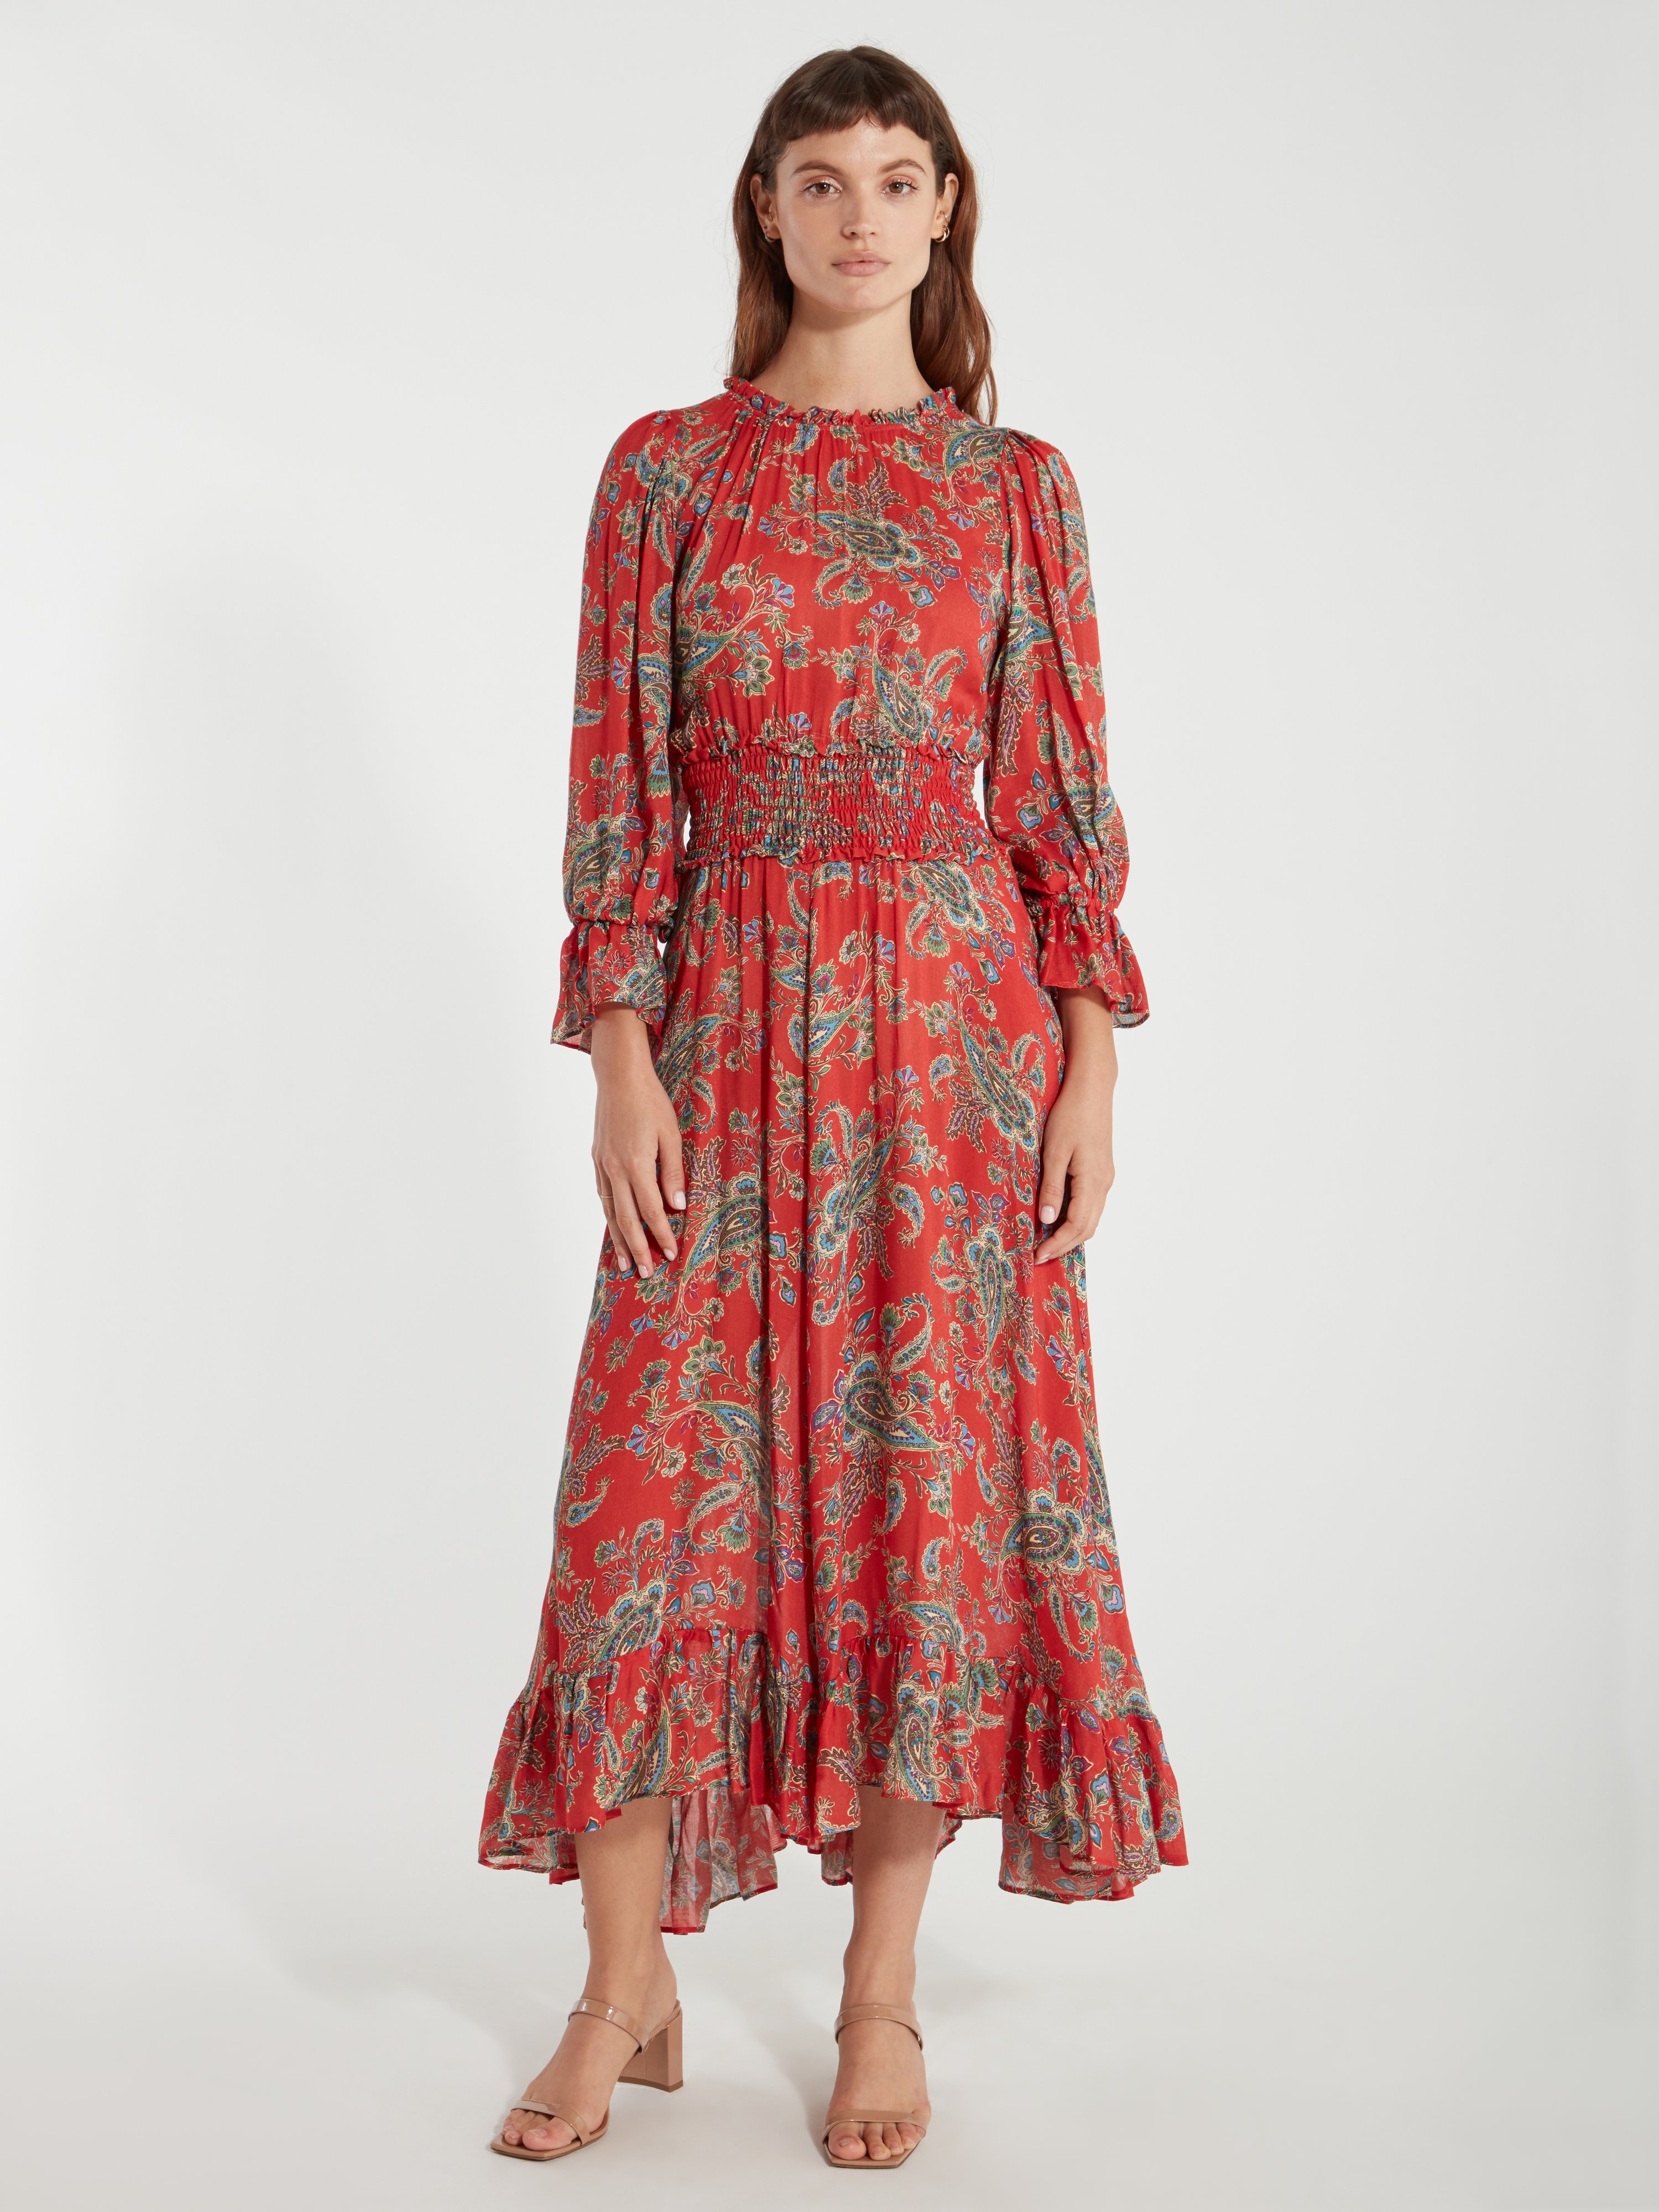 Icons Objects Of Devotion The Long Peasant Midi Dress In Red Paisley